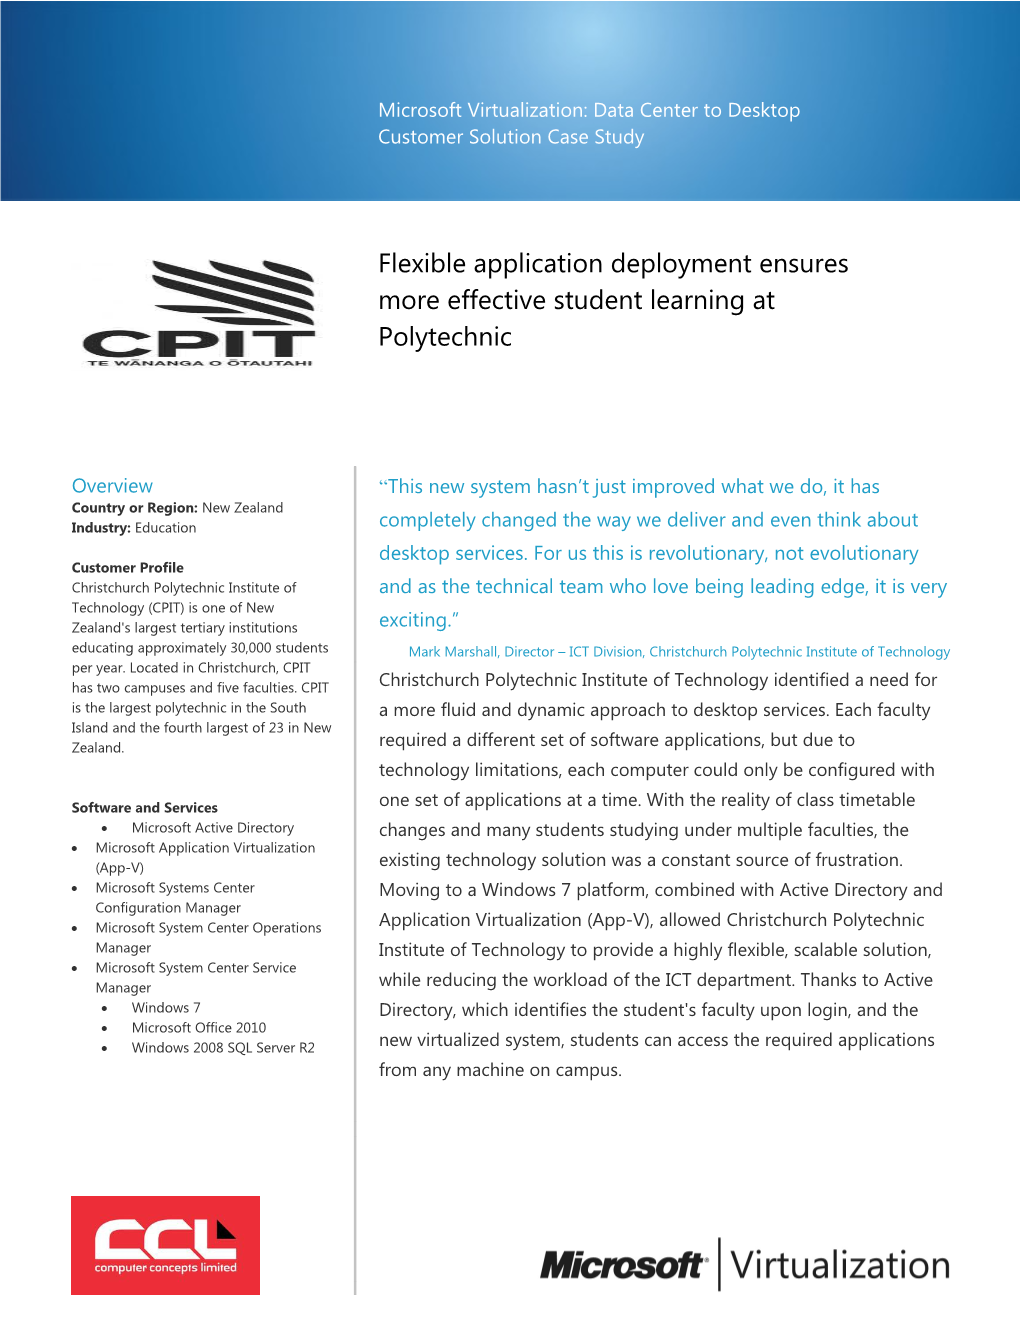 Metia CEP Flexible Application Deployment Ensures More Effective Student Learning at Polytechni